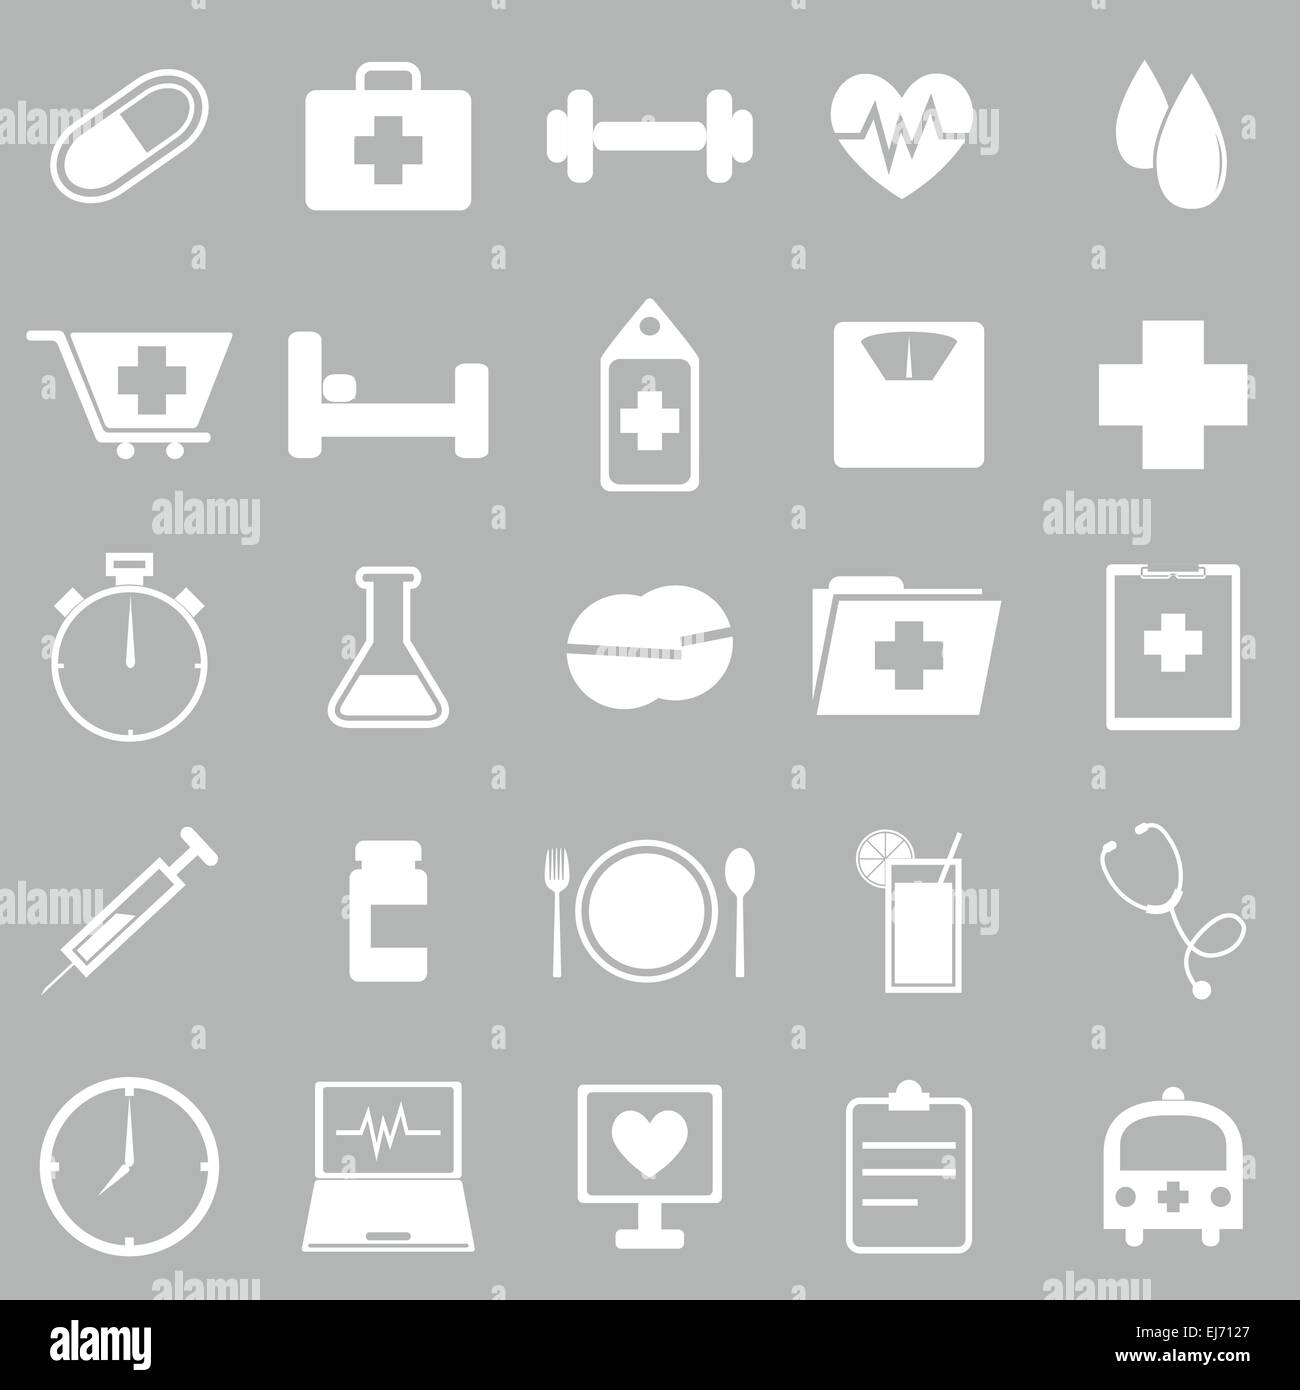 Health icons on gray background, stock vector Stock Vector